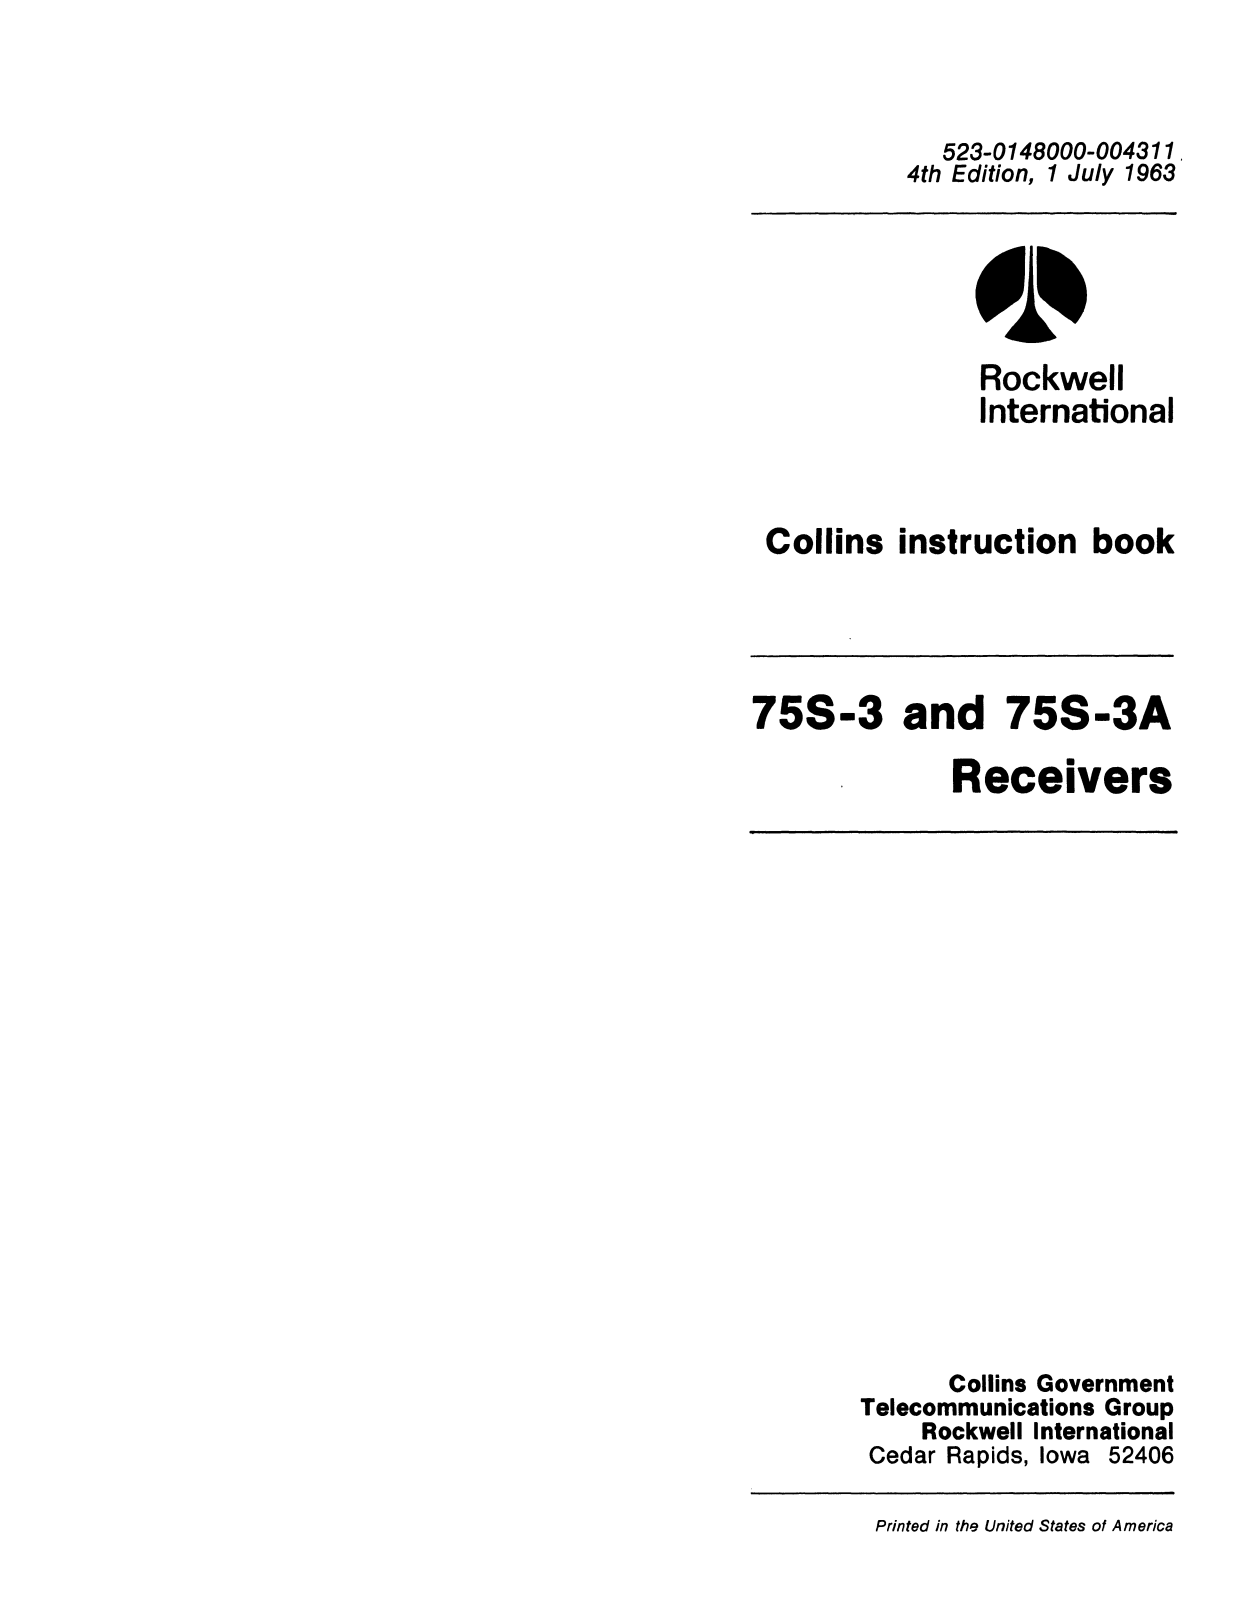 Collins 75S-3, 75S-3A User Guide